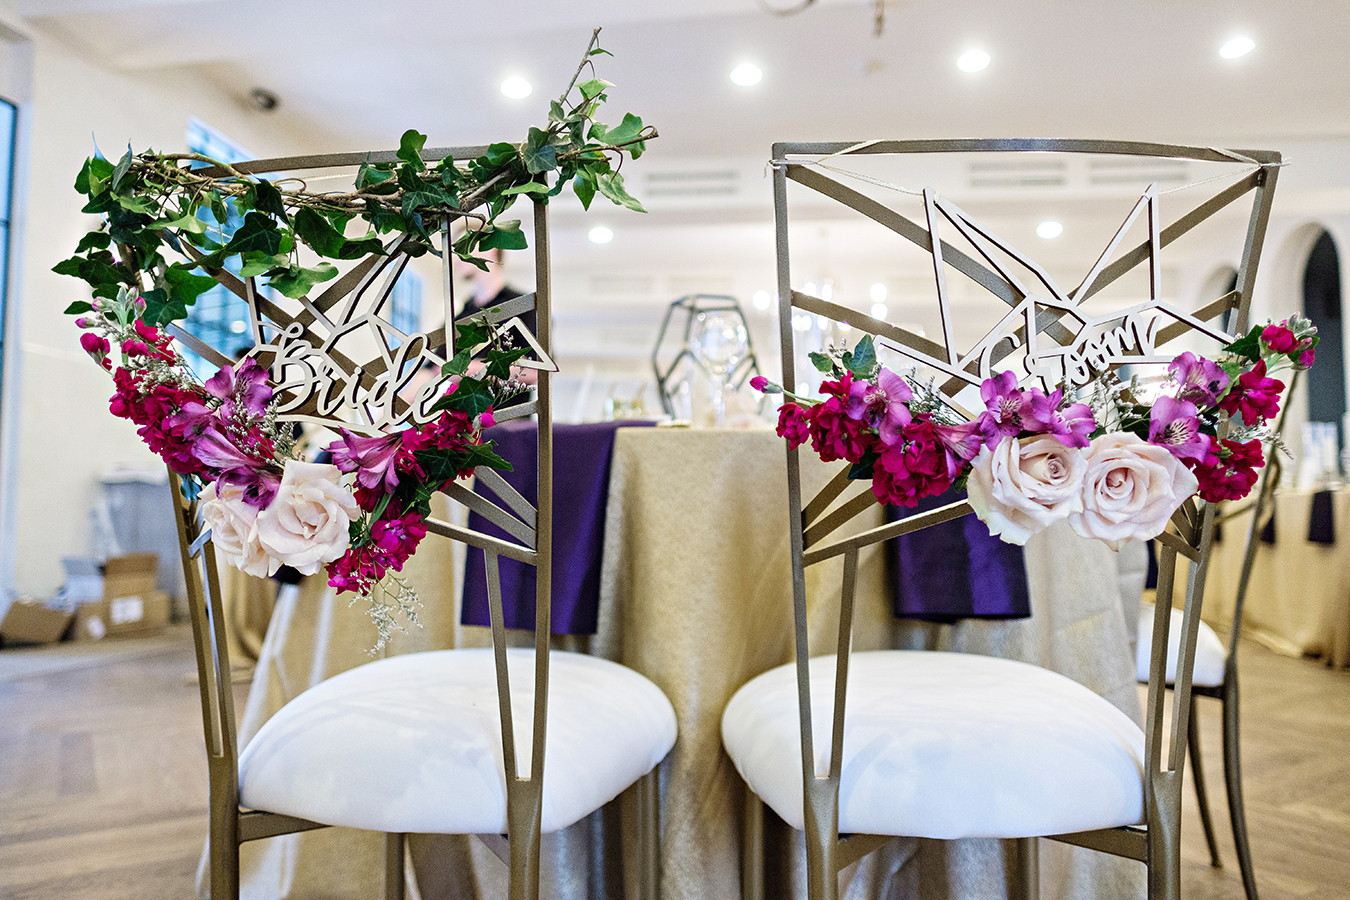 True Value Rental's Chameleon Chairs with floral decoration. Photo by: Studio Tran Photography